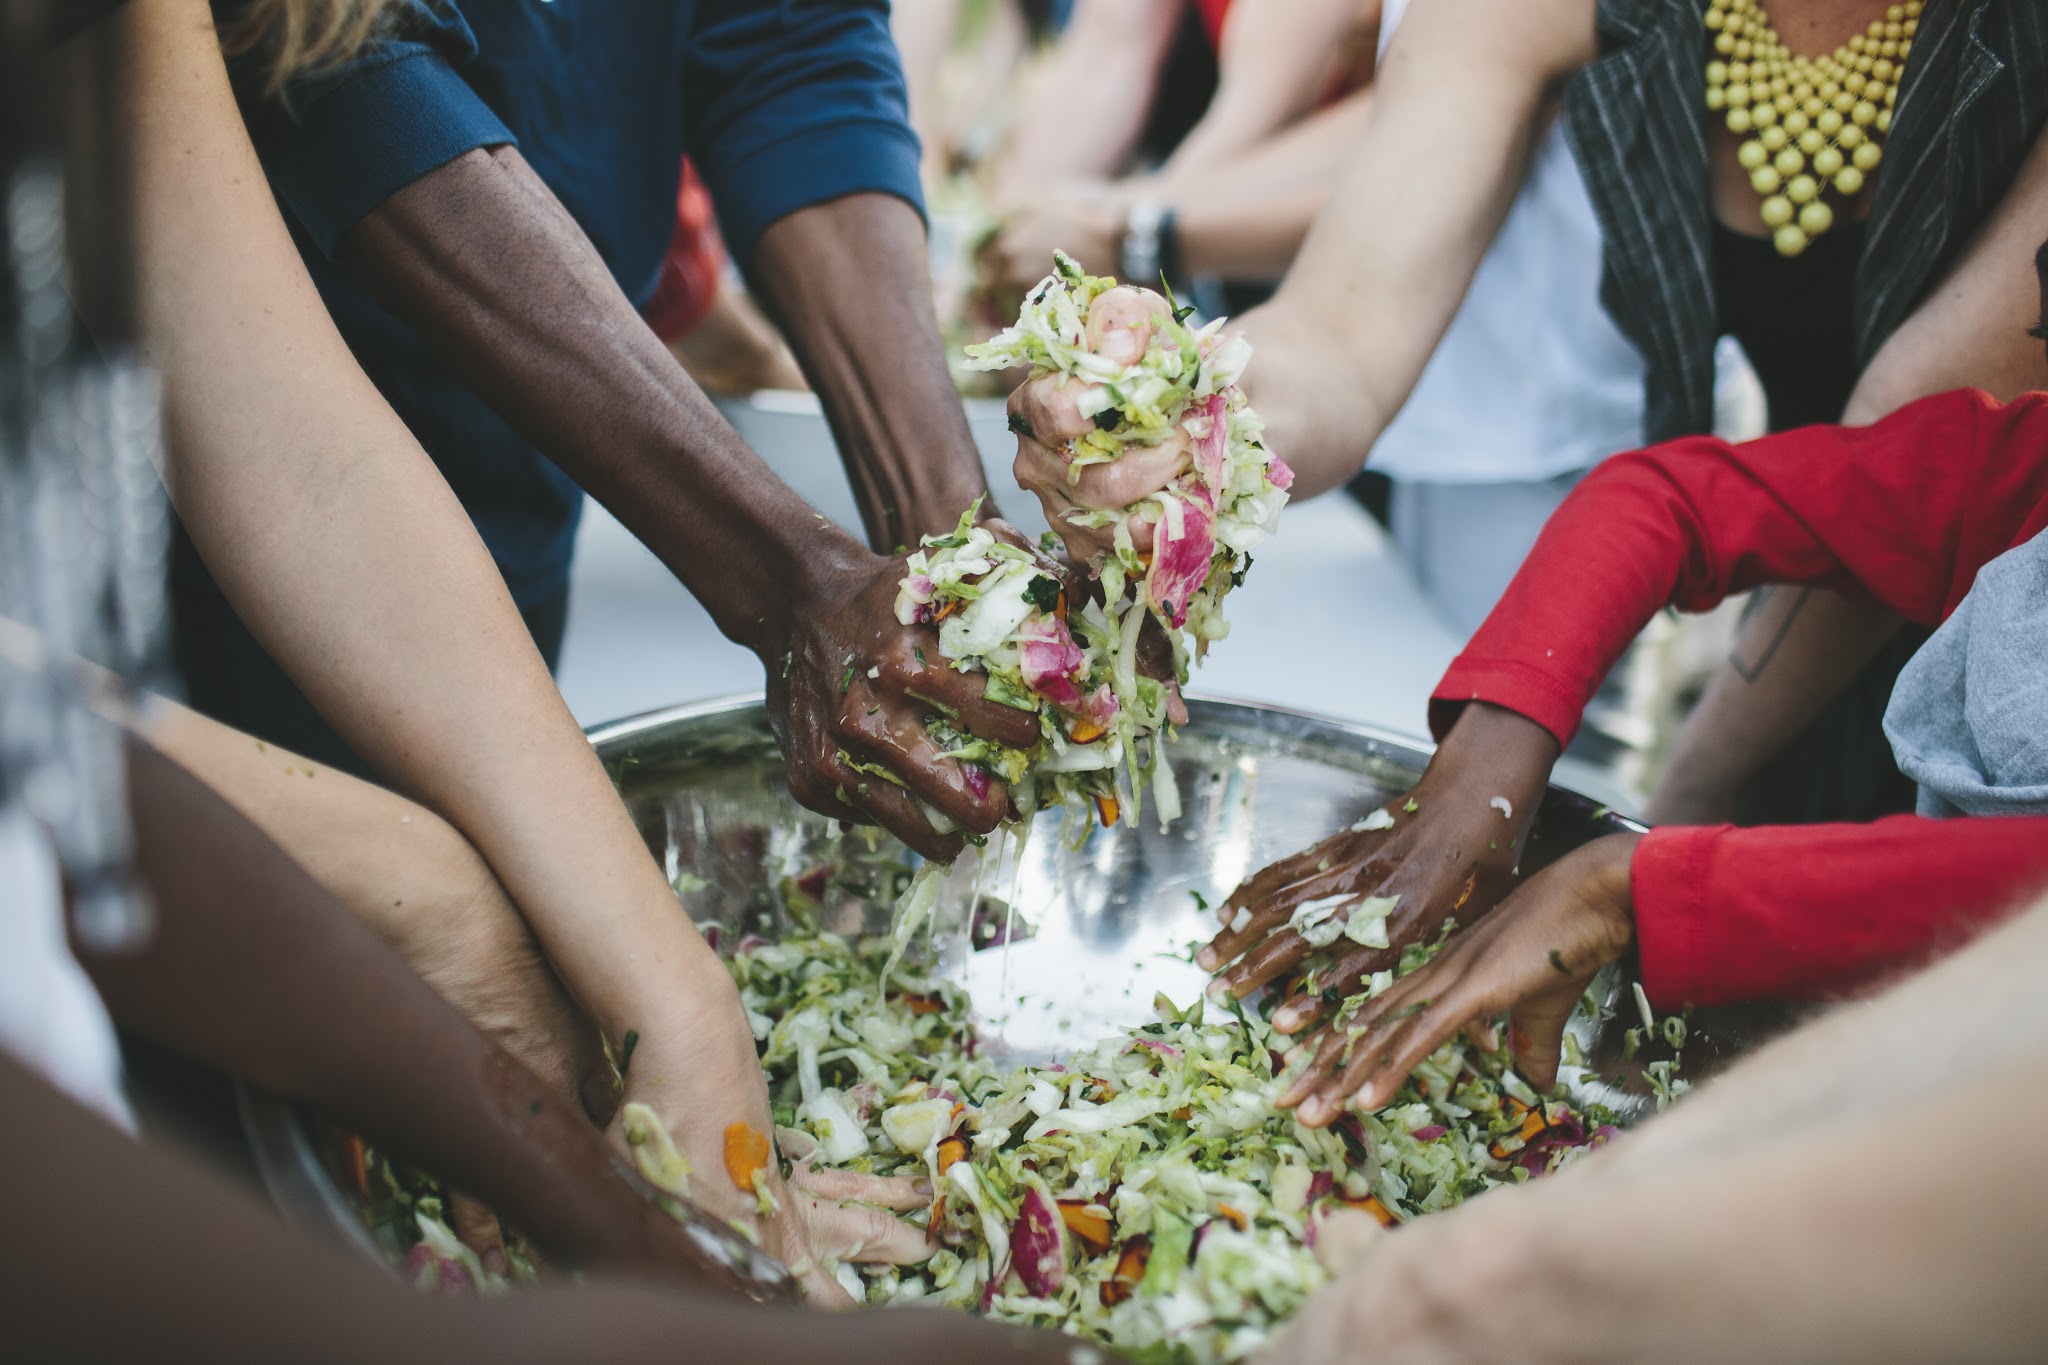 Diverse hands mixing cabbage in a large bowl